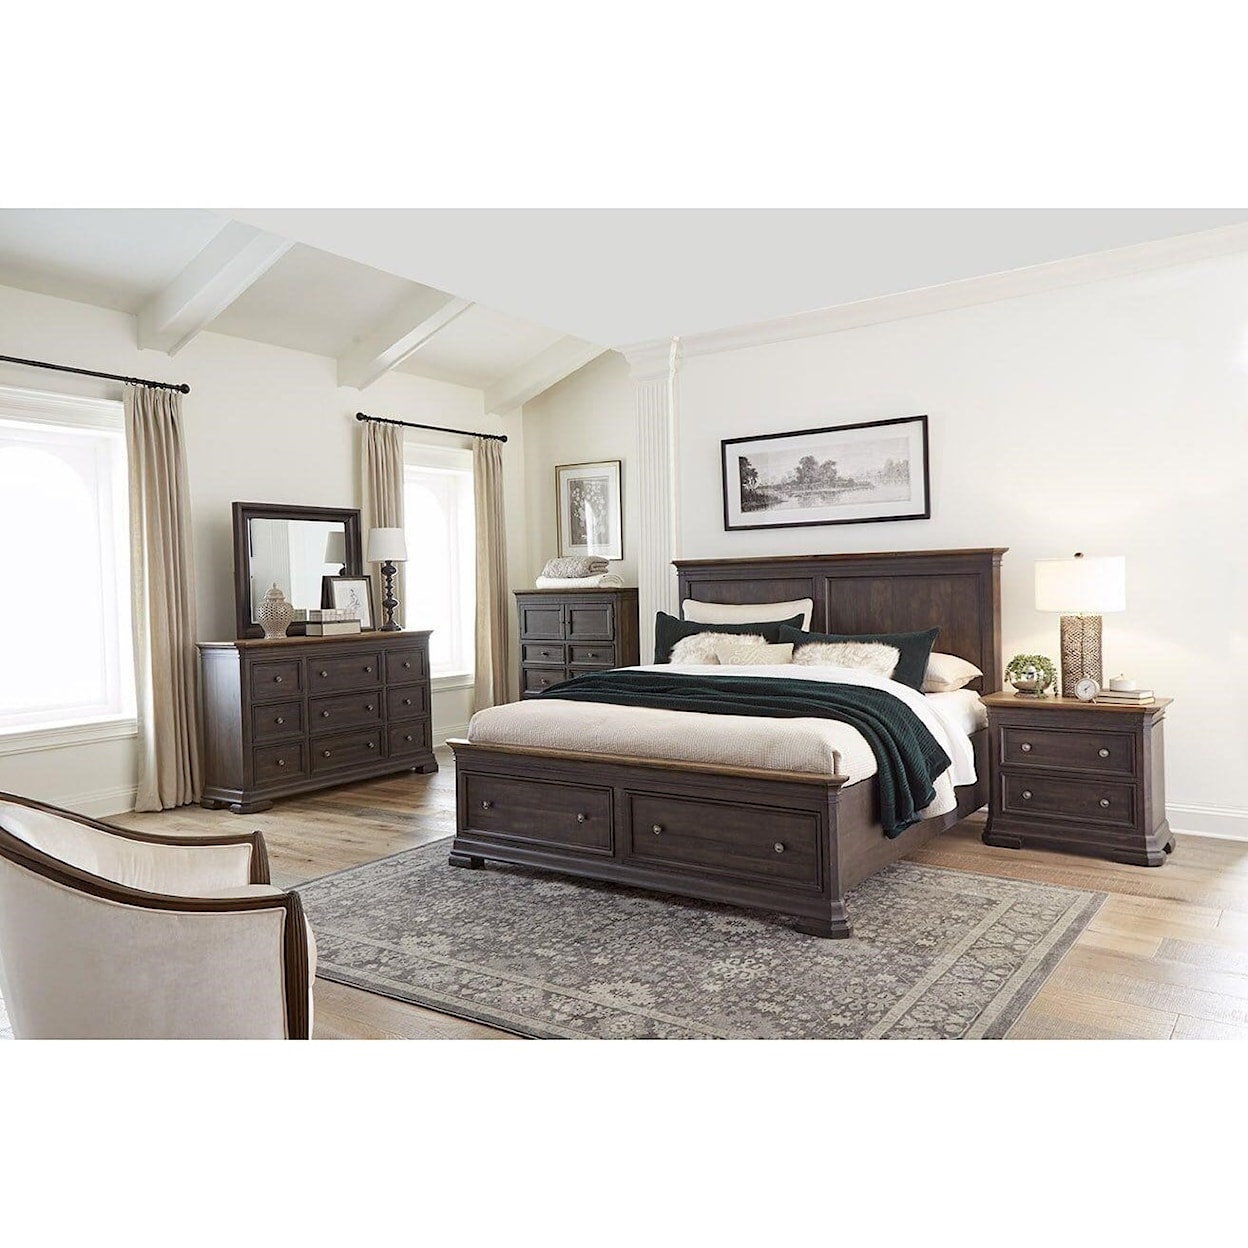 Napa Furniture Design The Grand Louie Eastern King Bed